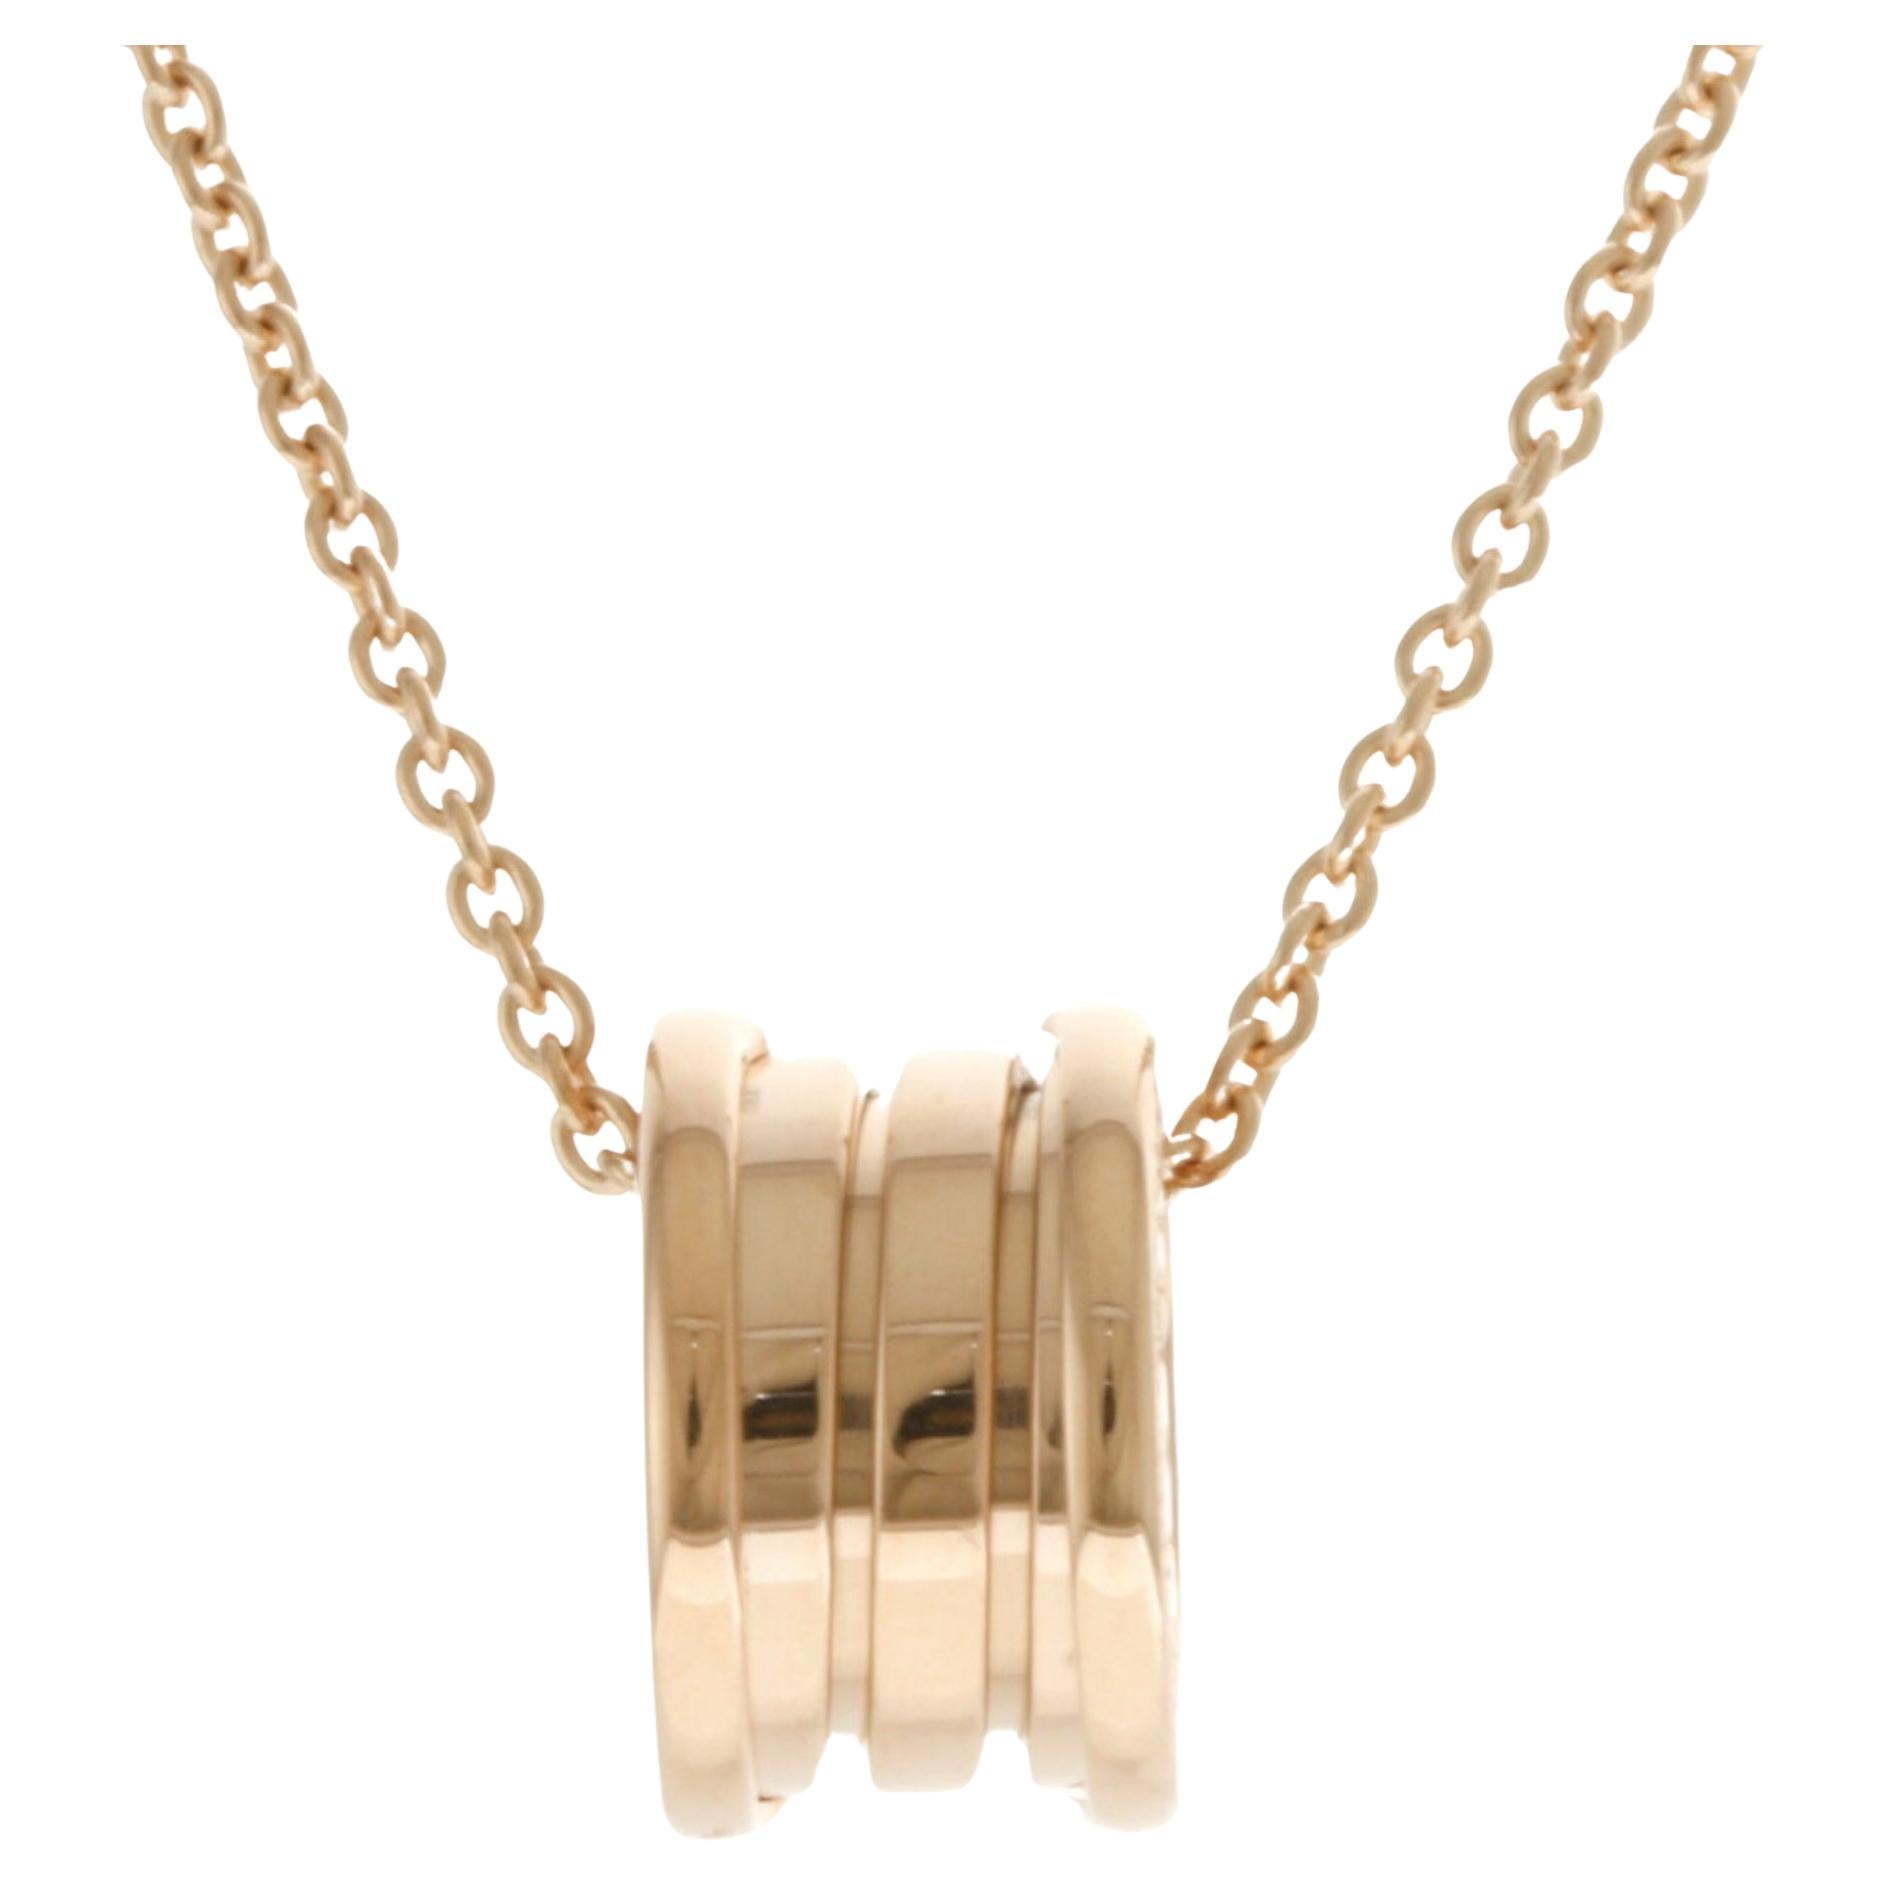 Bvlgari Be Zero One Necklace in 18K Pink Gold